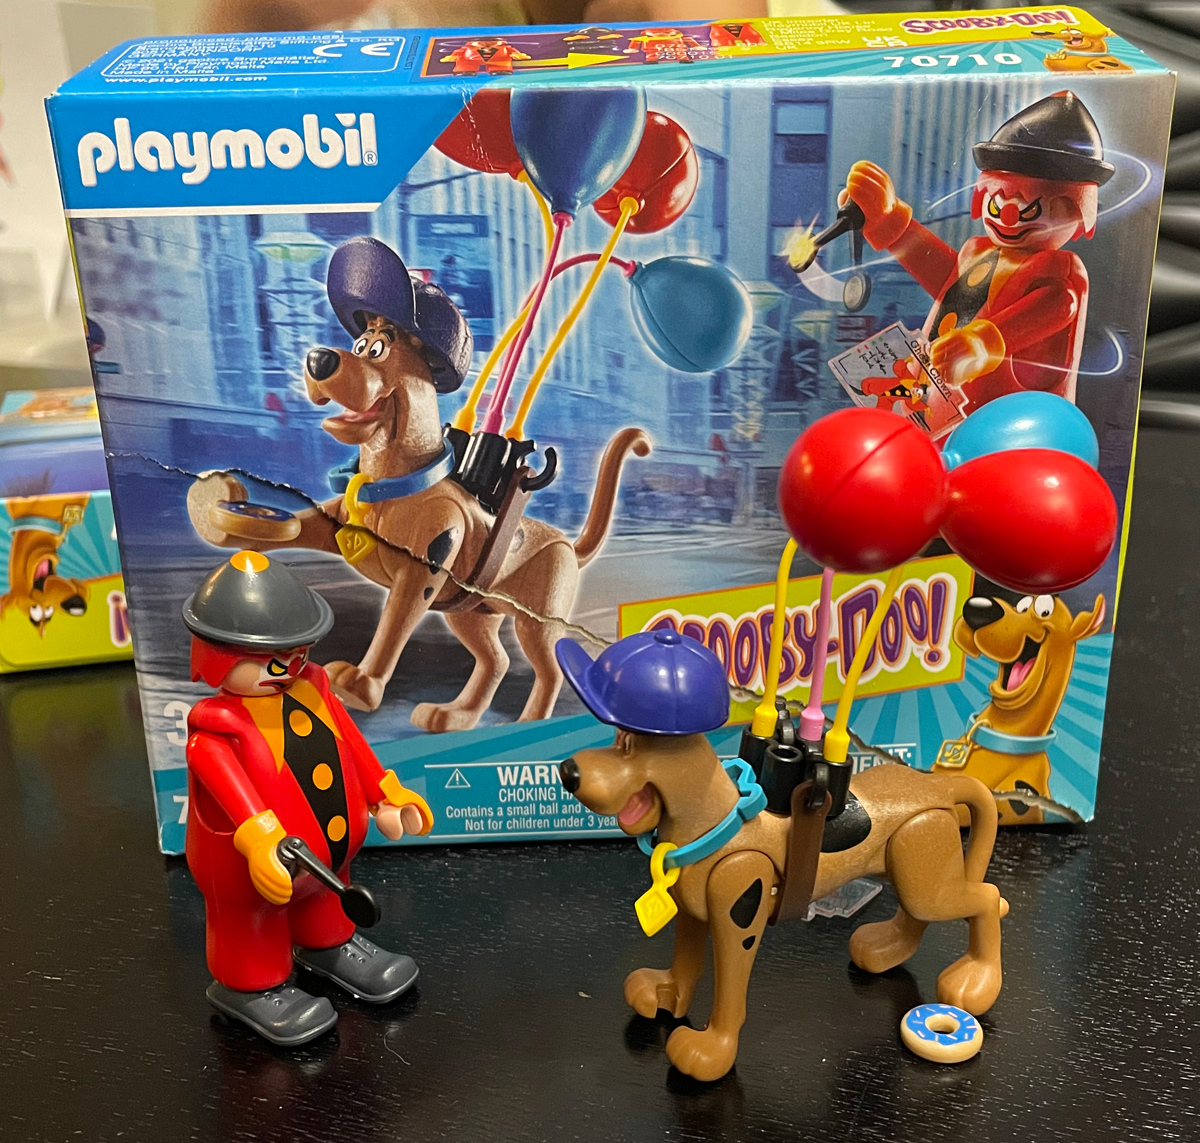 Scooby-Doo! Adventure with Ghost Clown - Playmobil – The Red